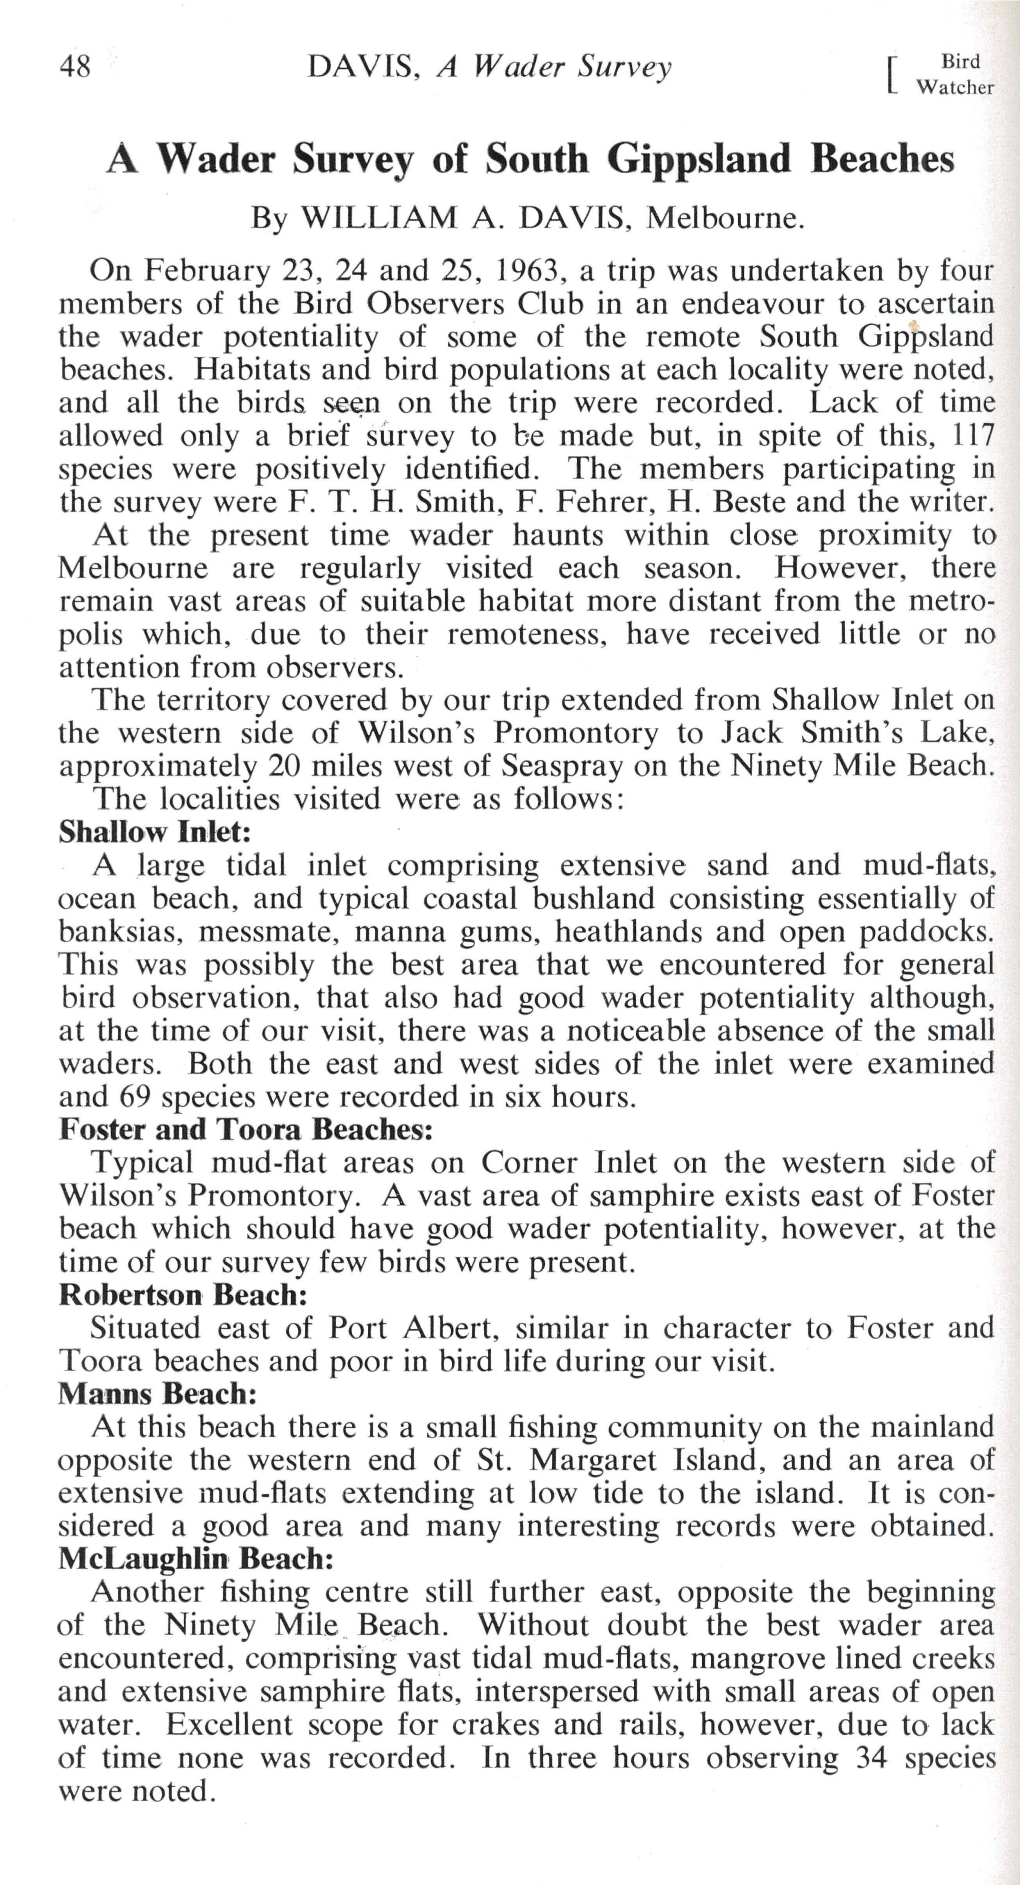 A Wader Survey of South Gippsland Beaches by WILLIAM A